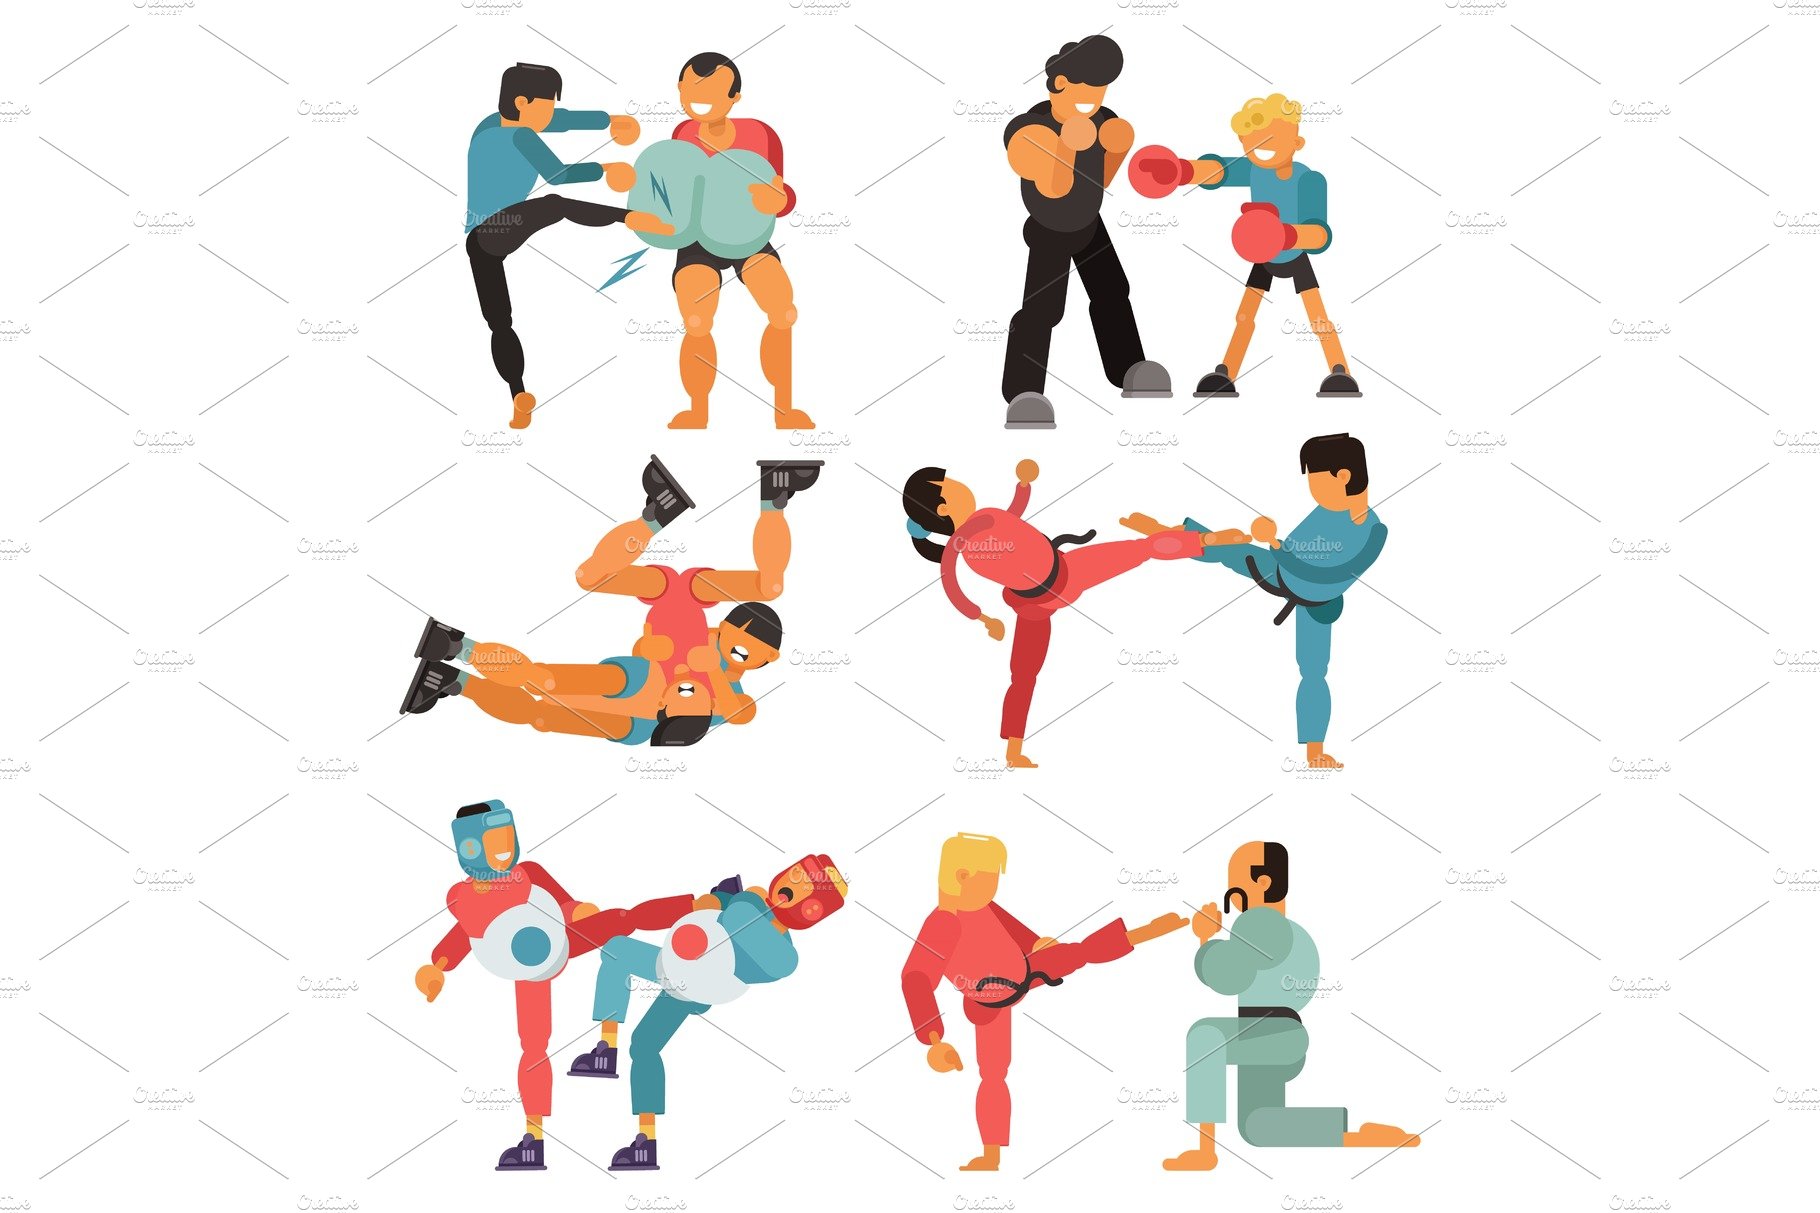 Martial art vector people character cover image.